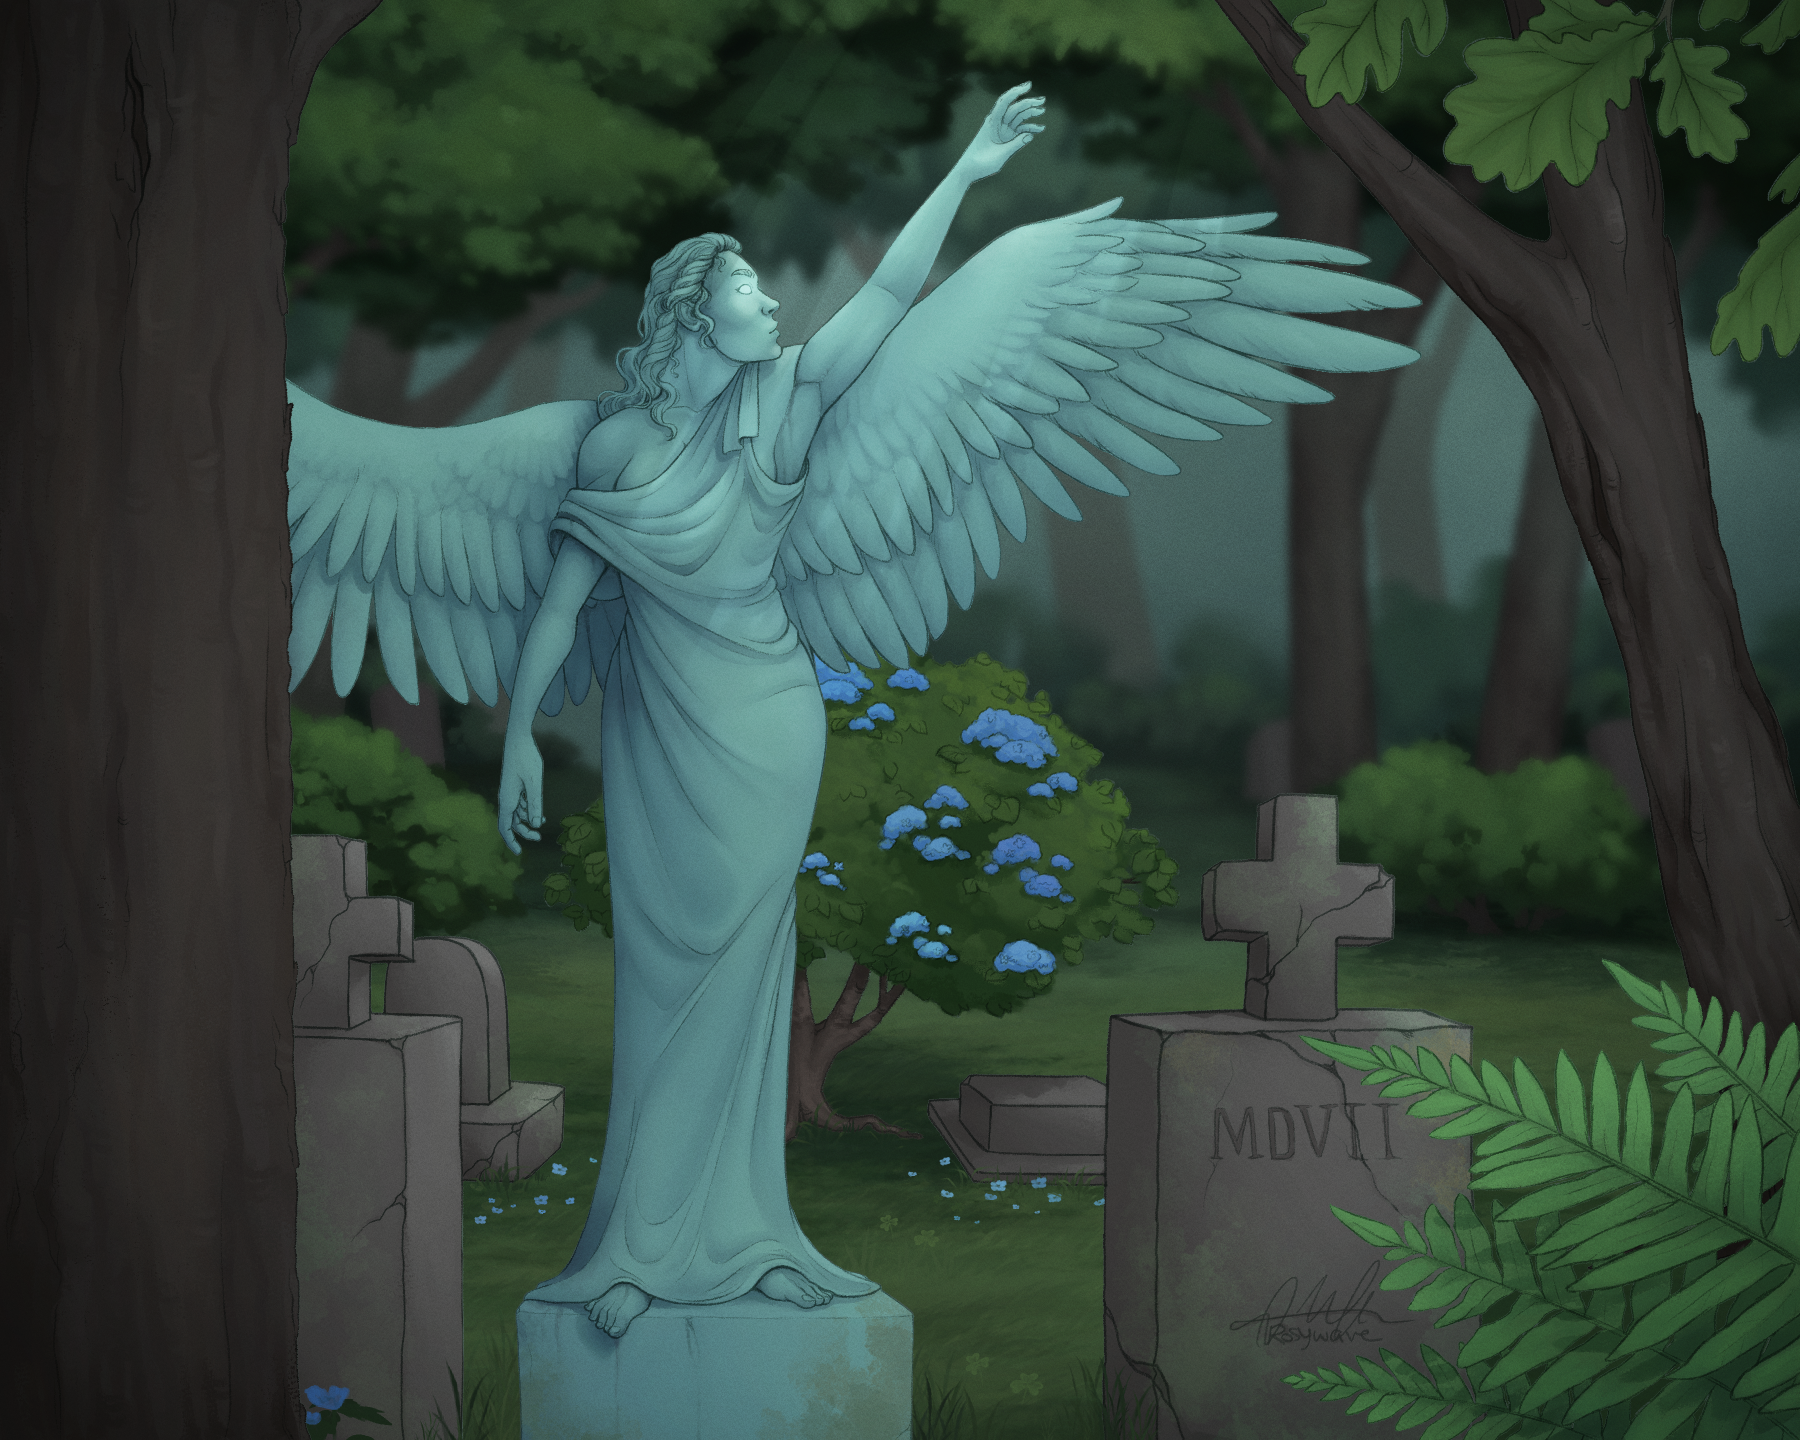 A patinaed copper statue of an angel with glowing eyes reaching up with one hand towards faint rays of light. She is standing in a wooded cemetery surrounded by old, lichen-covered gravestones. There are ferns and trees in the foreground and a hydrangea shrub behind her.